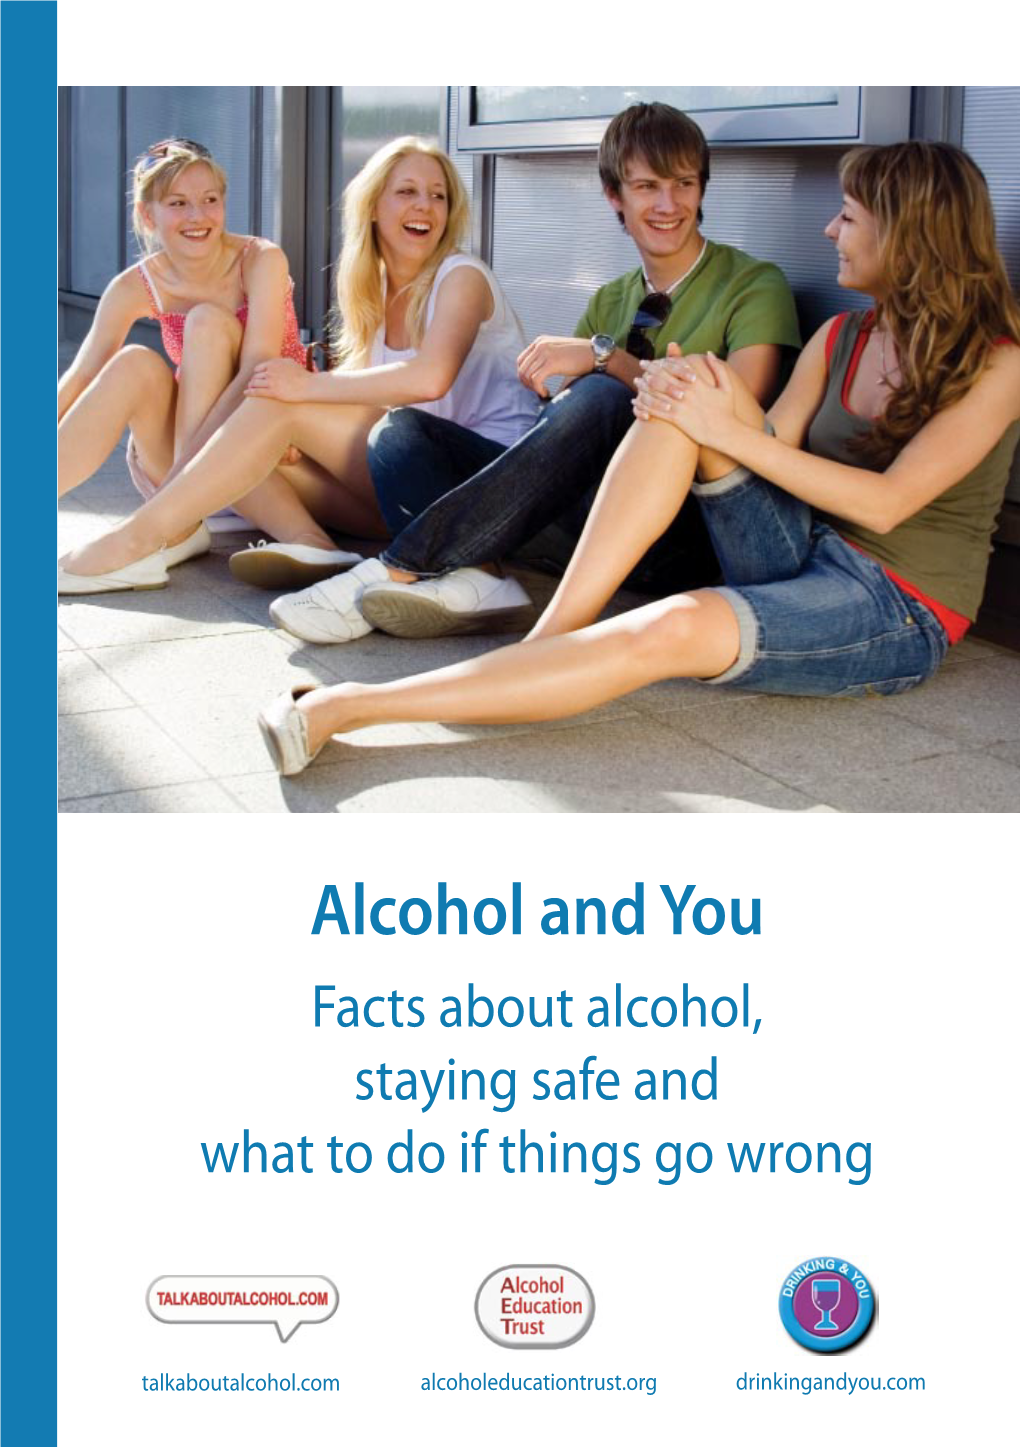 Alcohol and You Facts About Alcohol, Staying Safe and What to Do If Things Go Wrong